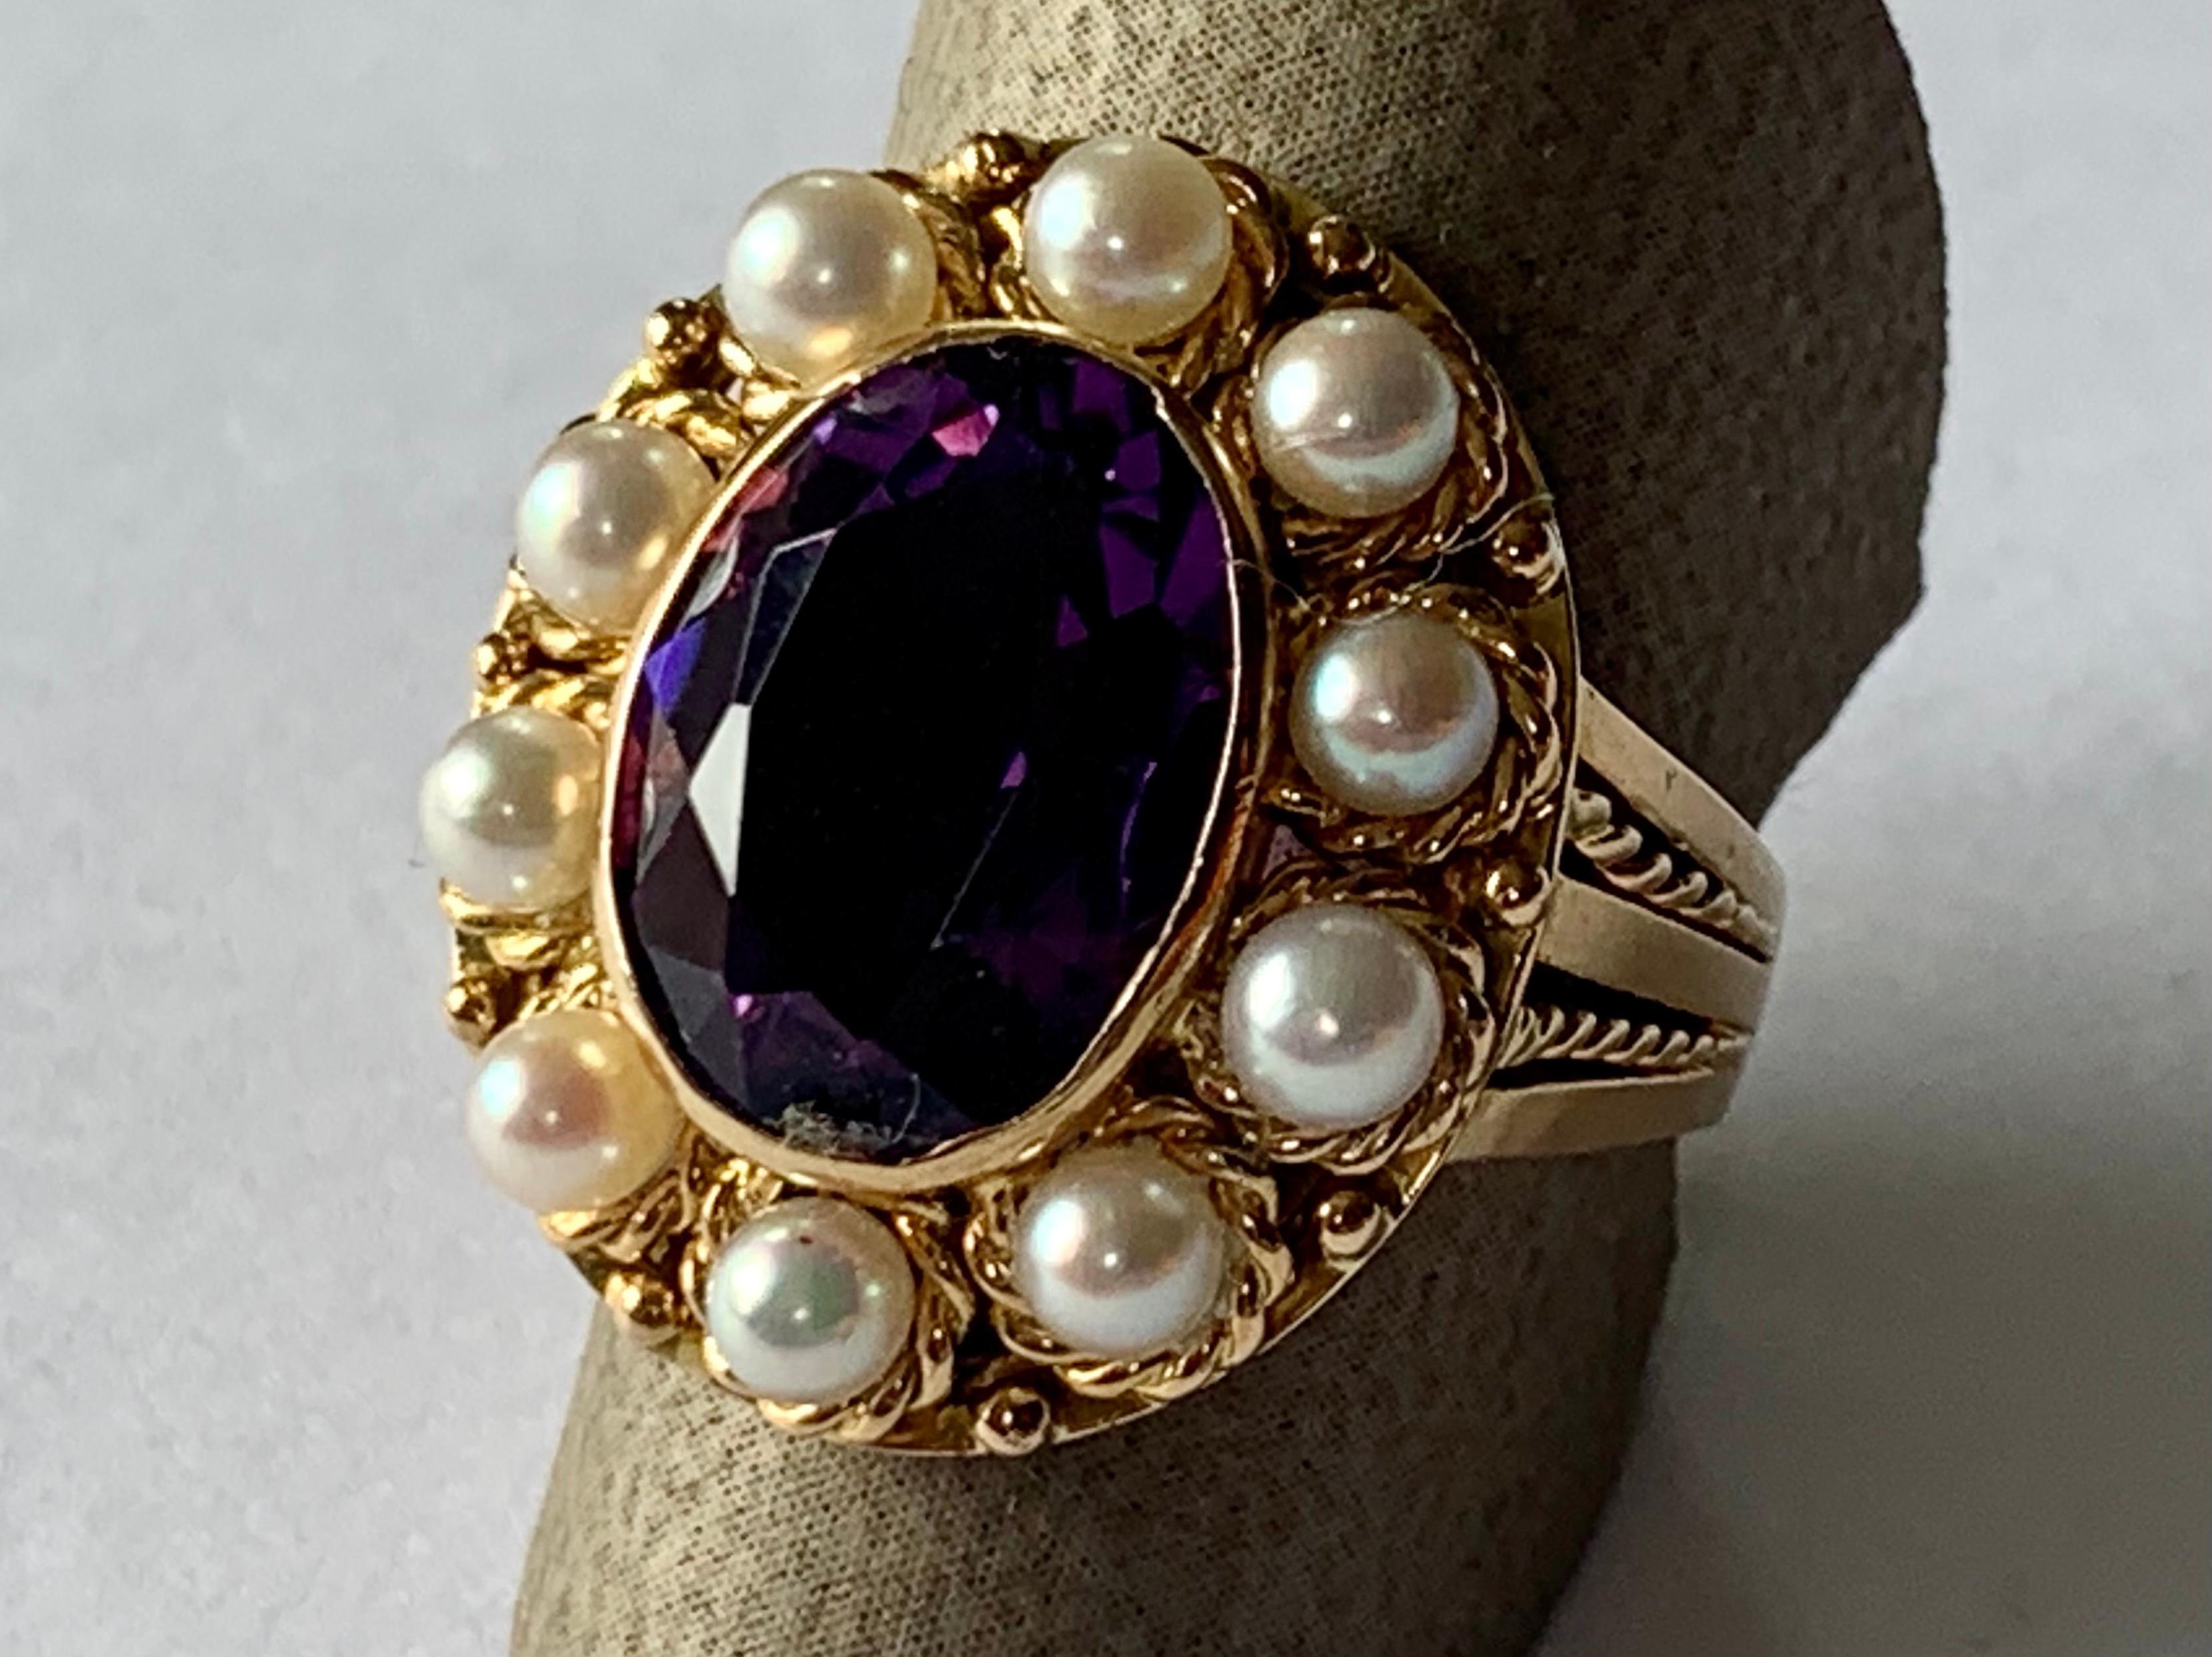 Vintage 18 K Yellow Gold Victorian Inspired Ring with Amethyst and Pearls In Good Condition For Sale In Zurich, Zollstrasse